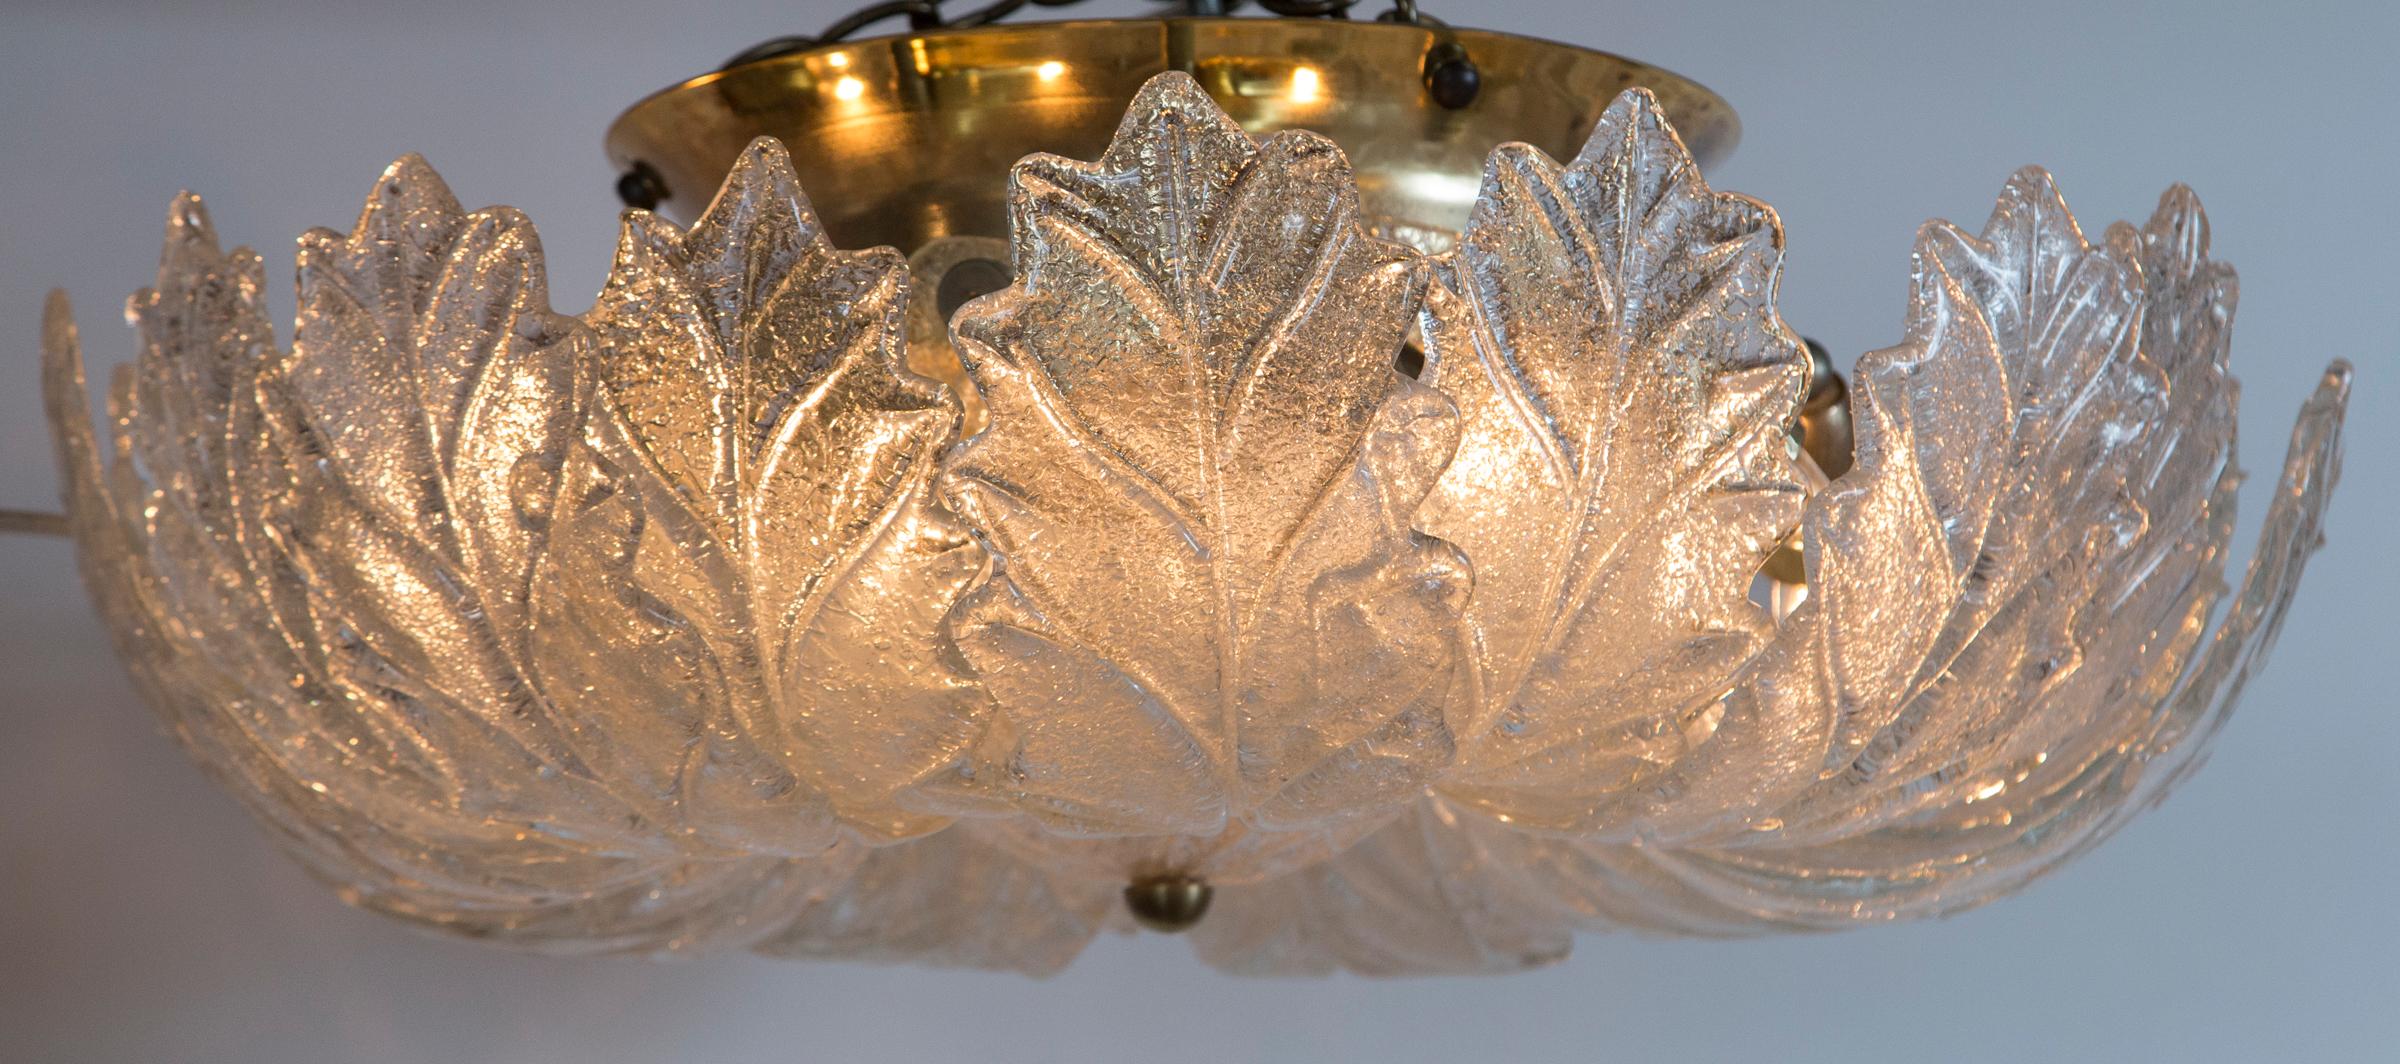 These Italian frosted clear glass fixtures illuminate with a warm and icy effect, composed of 18 curled leaves finishing with a center glass bowl and brass hardware, note wonderful size! Substantial light for a small size.
Illuminates with 9